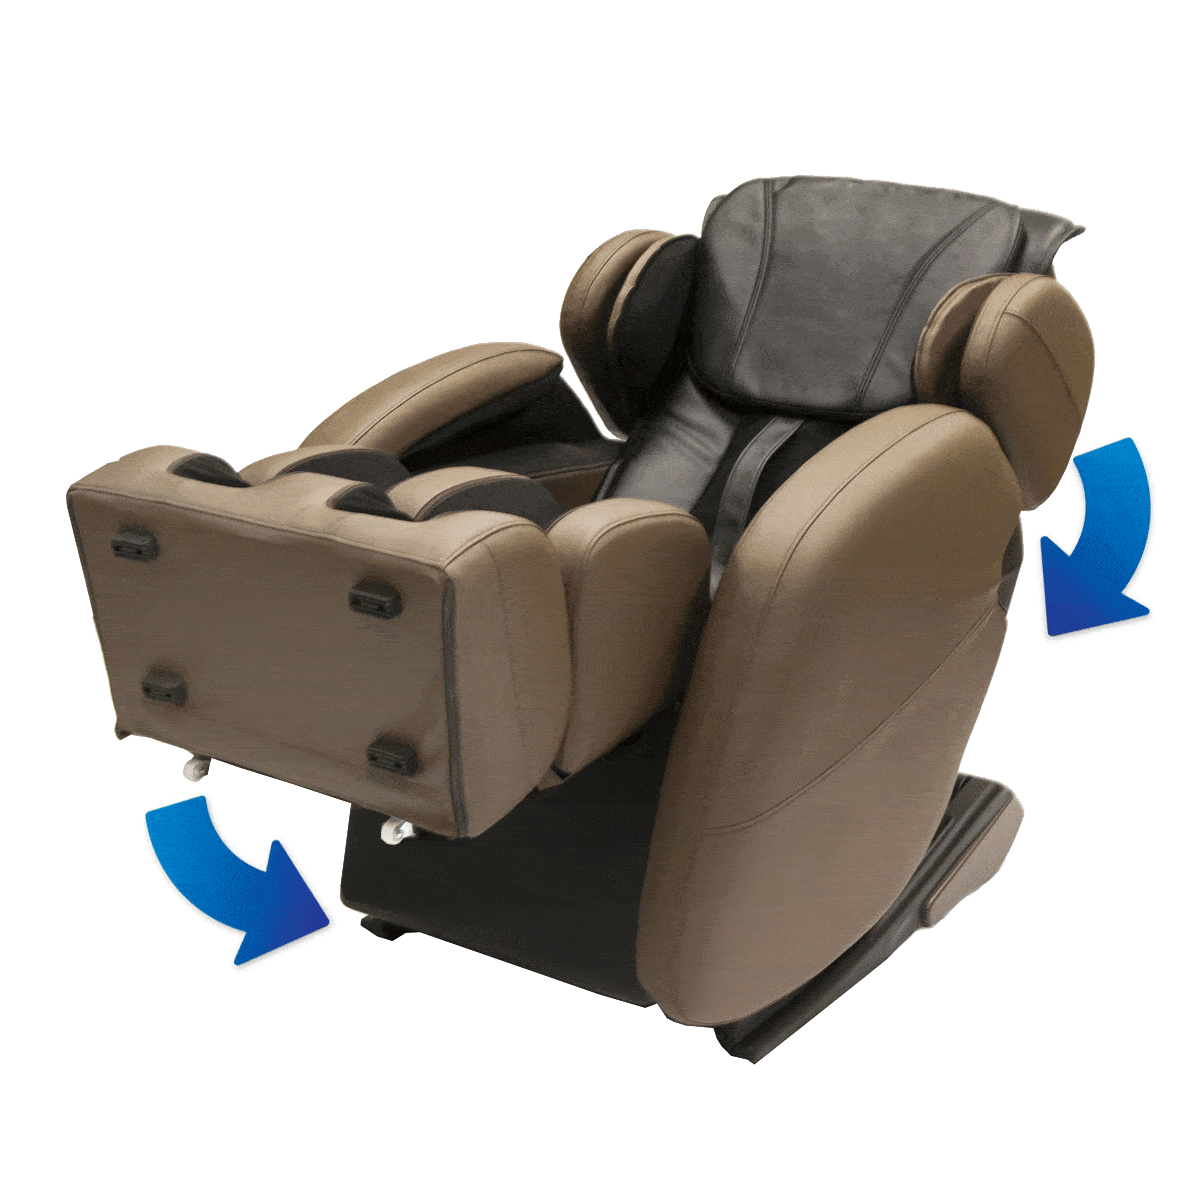 How Many Types of Massage Chairs Are There?